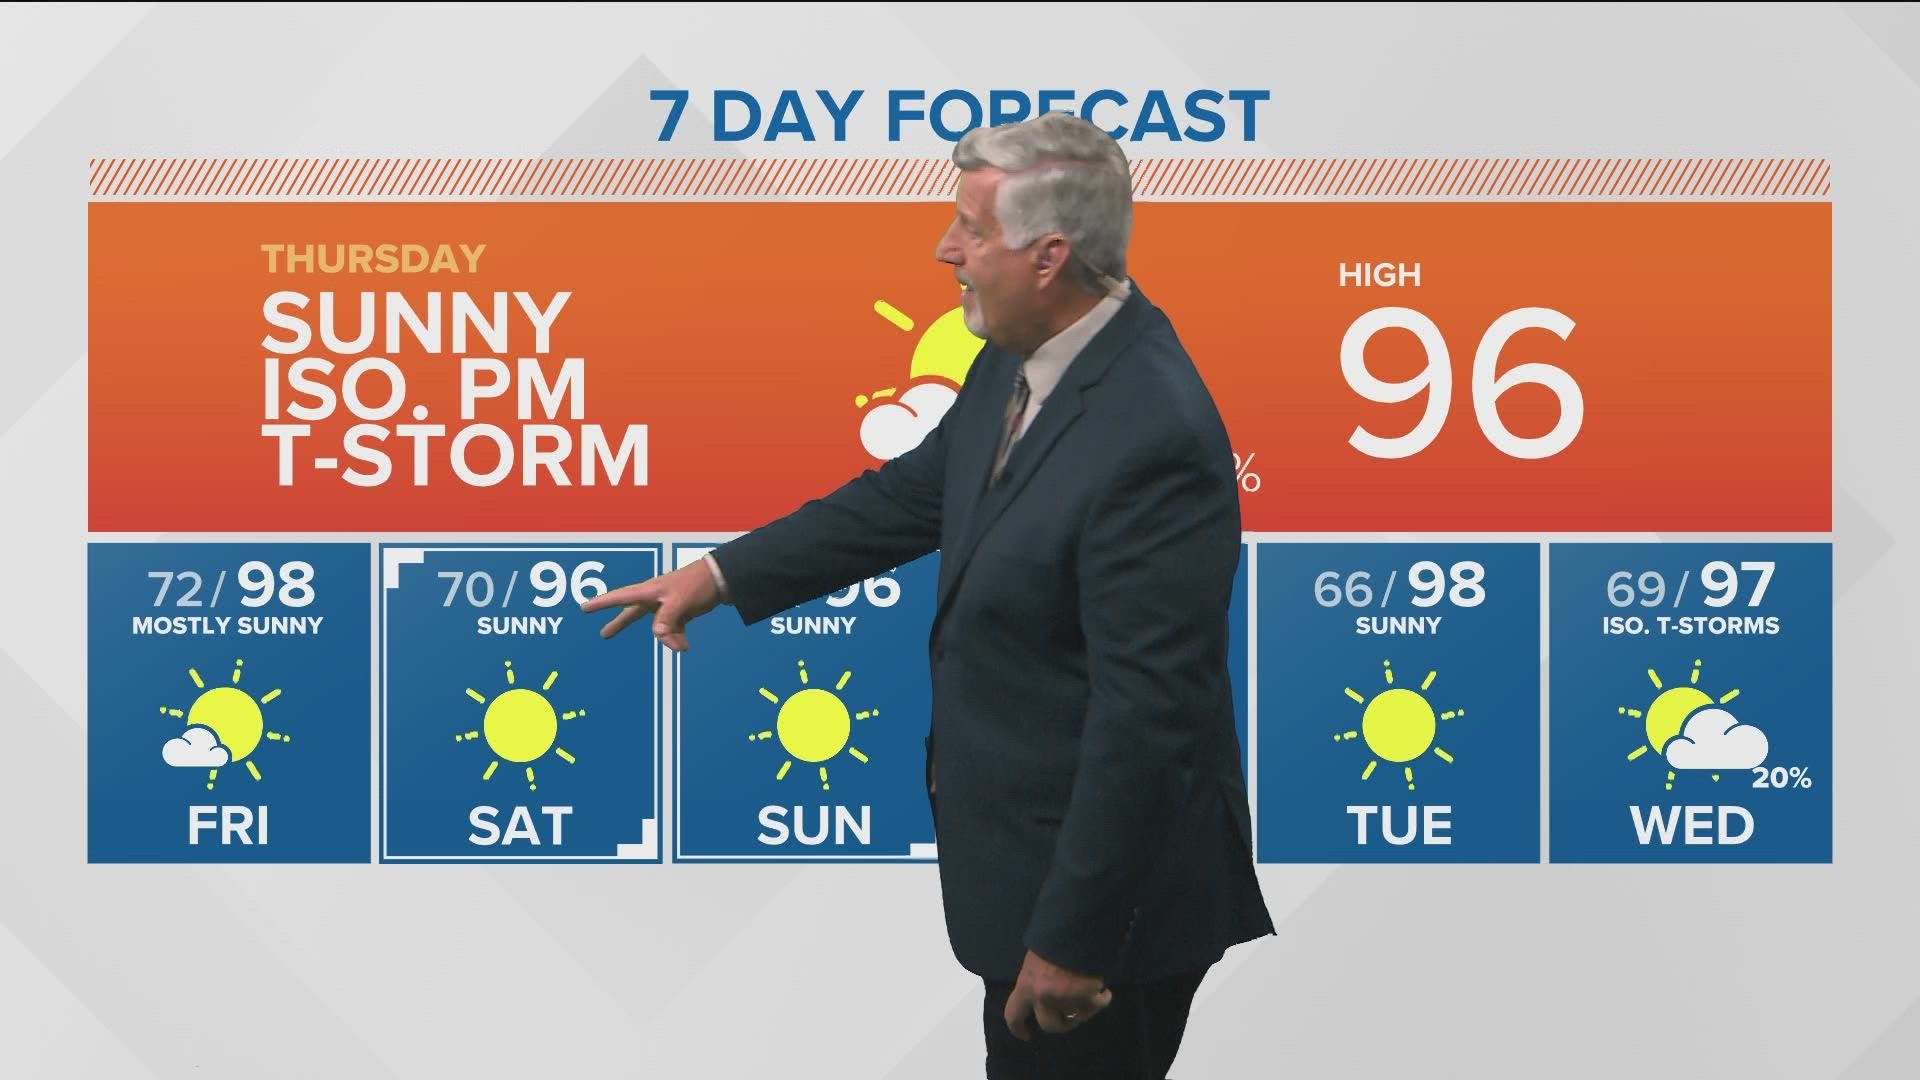 KTVB First Alert Weather for southwest and south-central Idaho, Aug. 11, 2022, with meteorologist Jim Duthie.